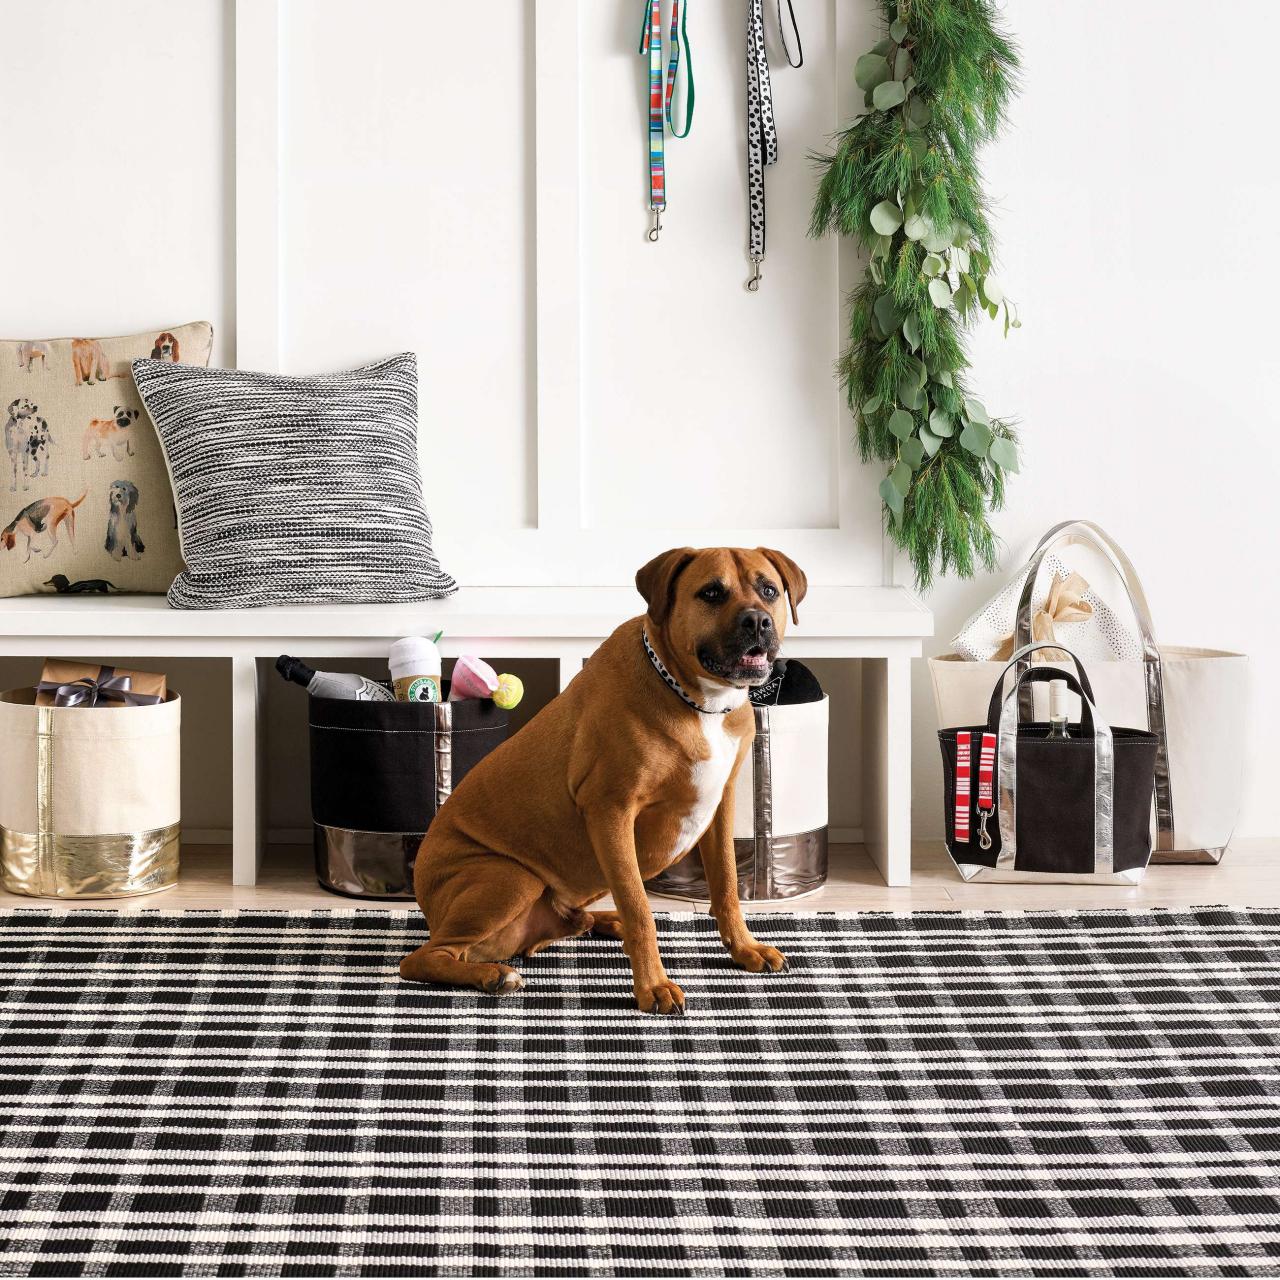 How to Choose the Best Rugs for Living Rooms - A Advanced Rug Care